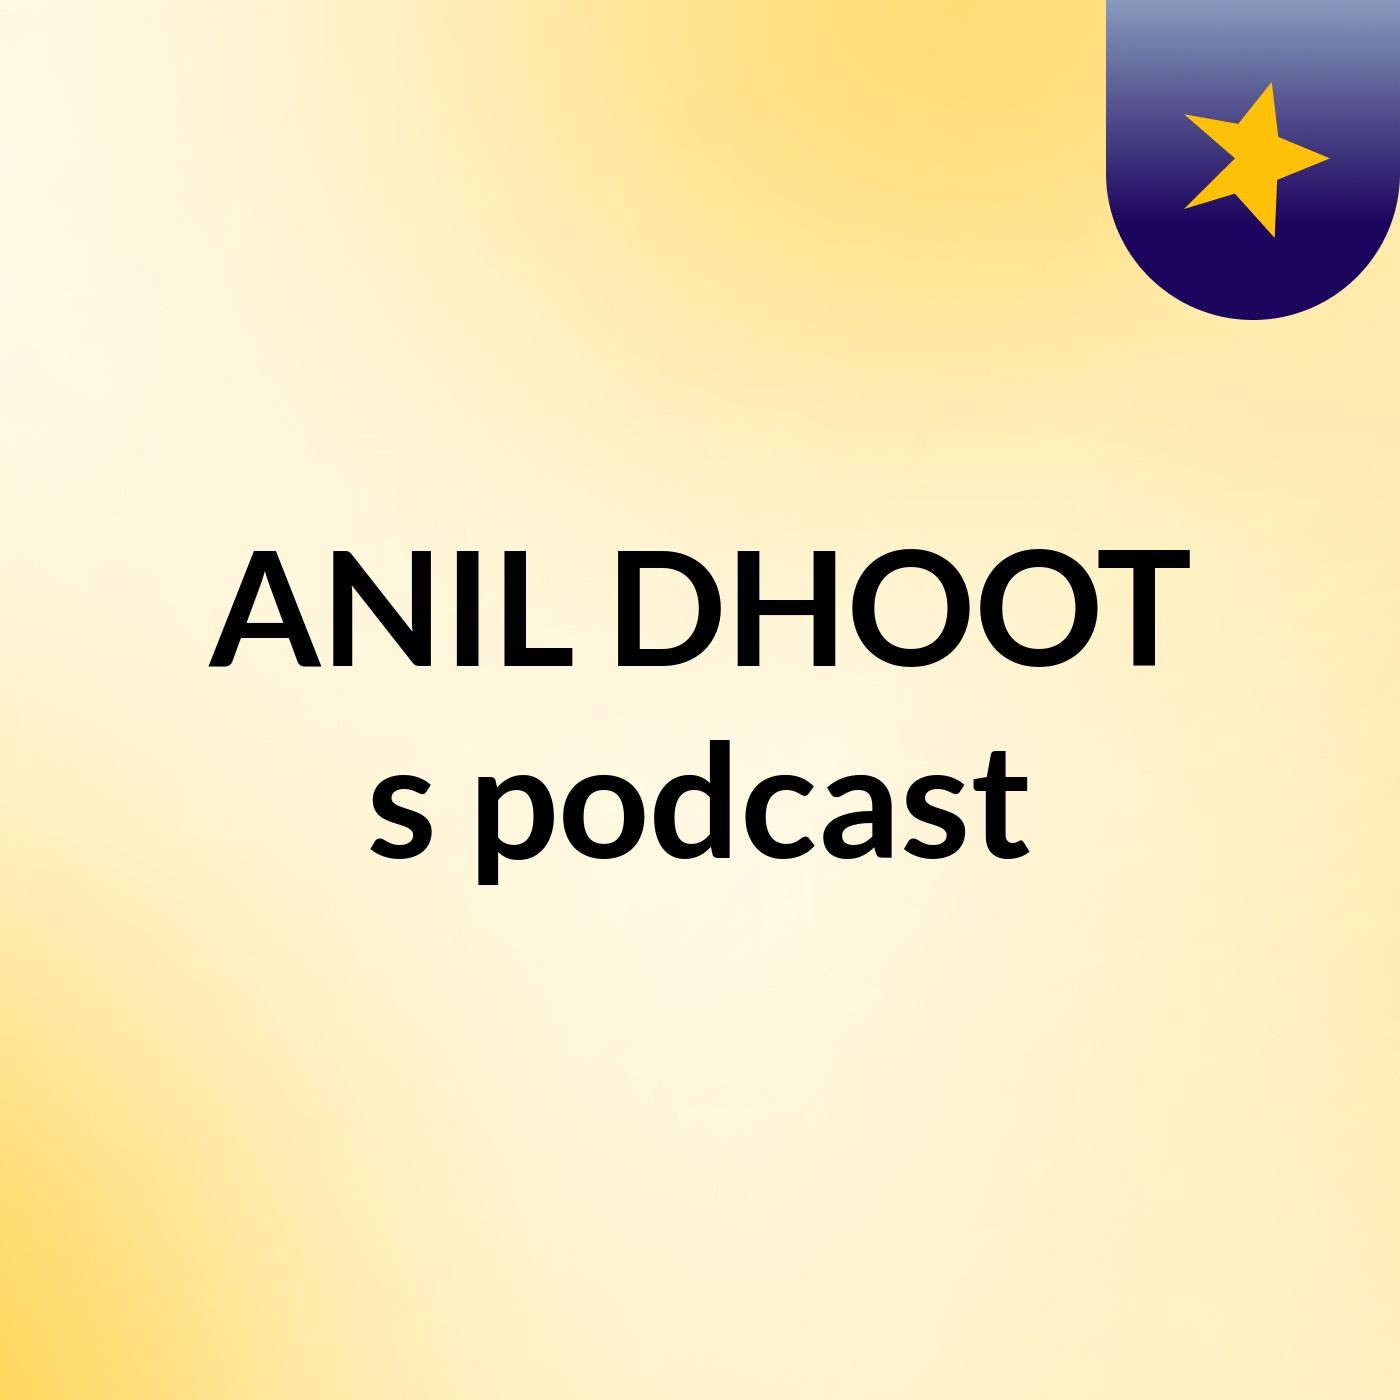 Episode 6 - ANIL DHOOT's podcast